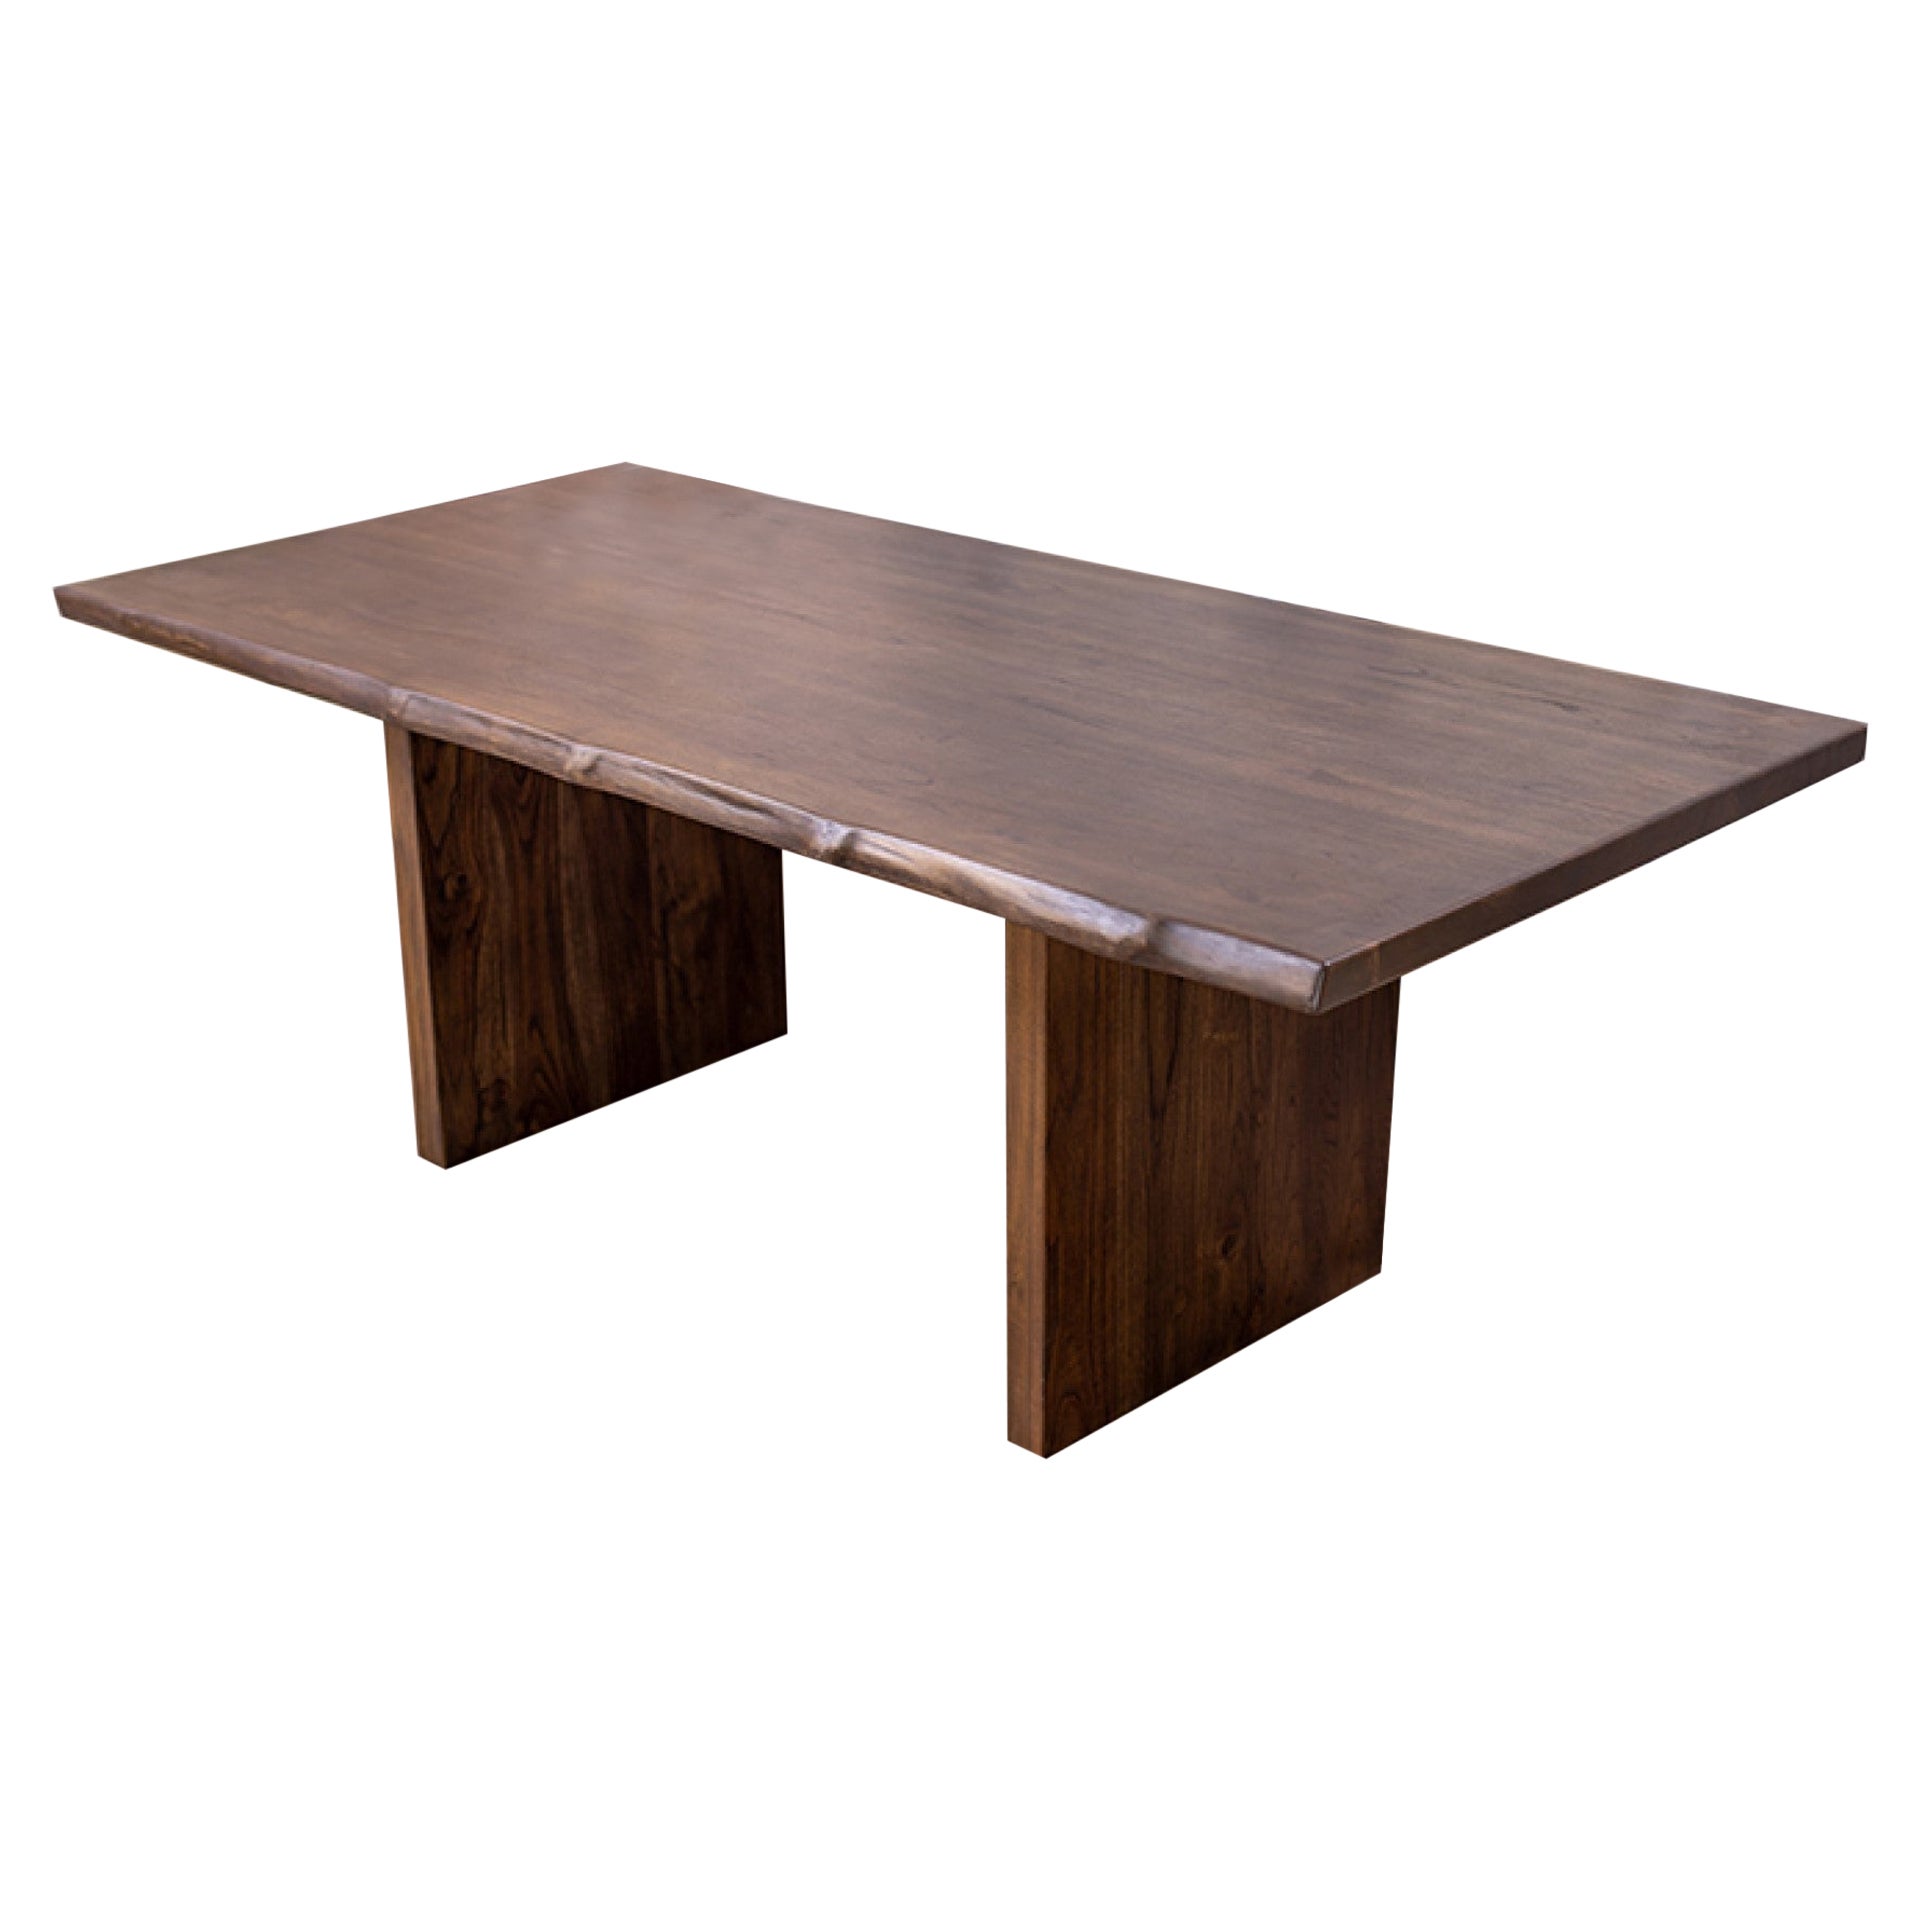 100% Solid Teak Live Edge Hand-Crafted Dining Table with Solid Teak Legs For Sale